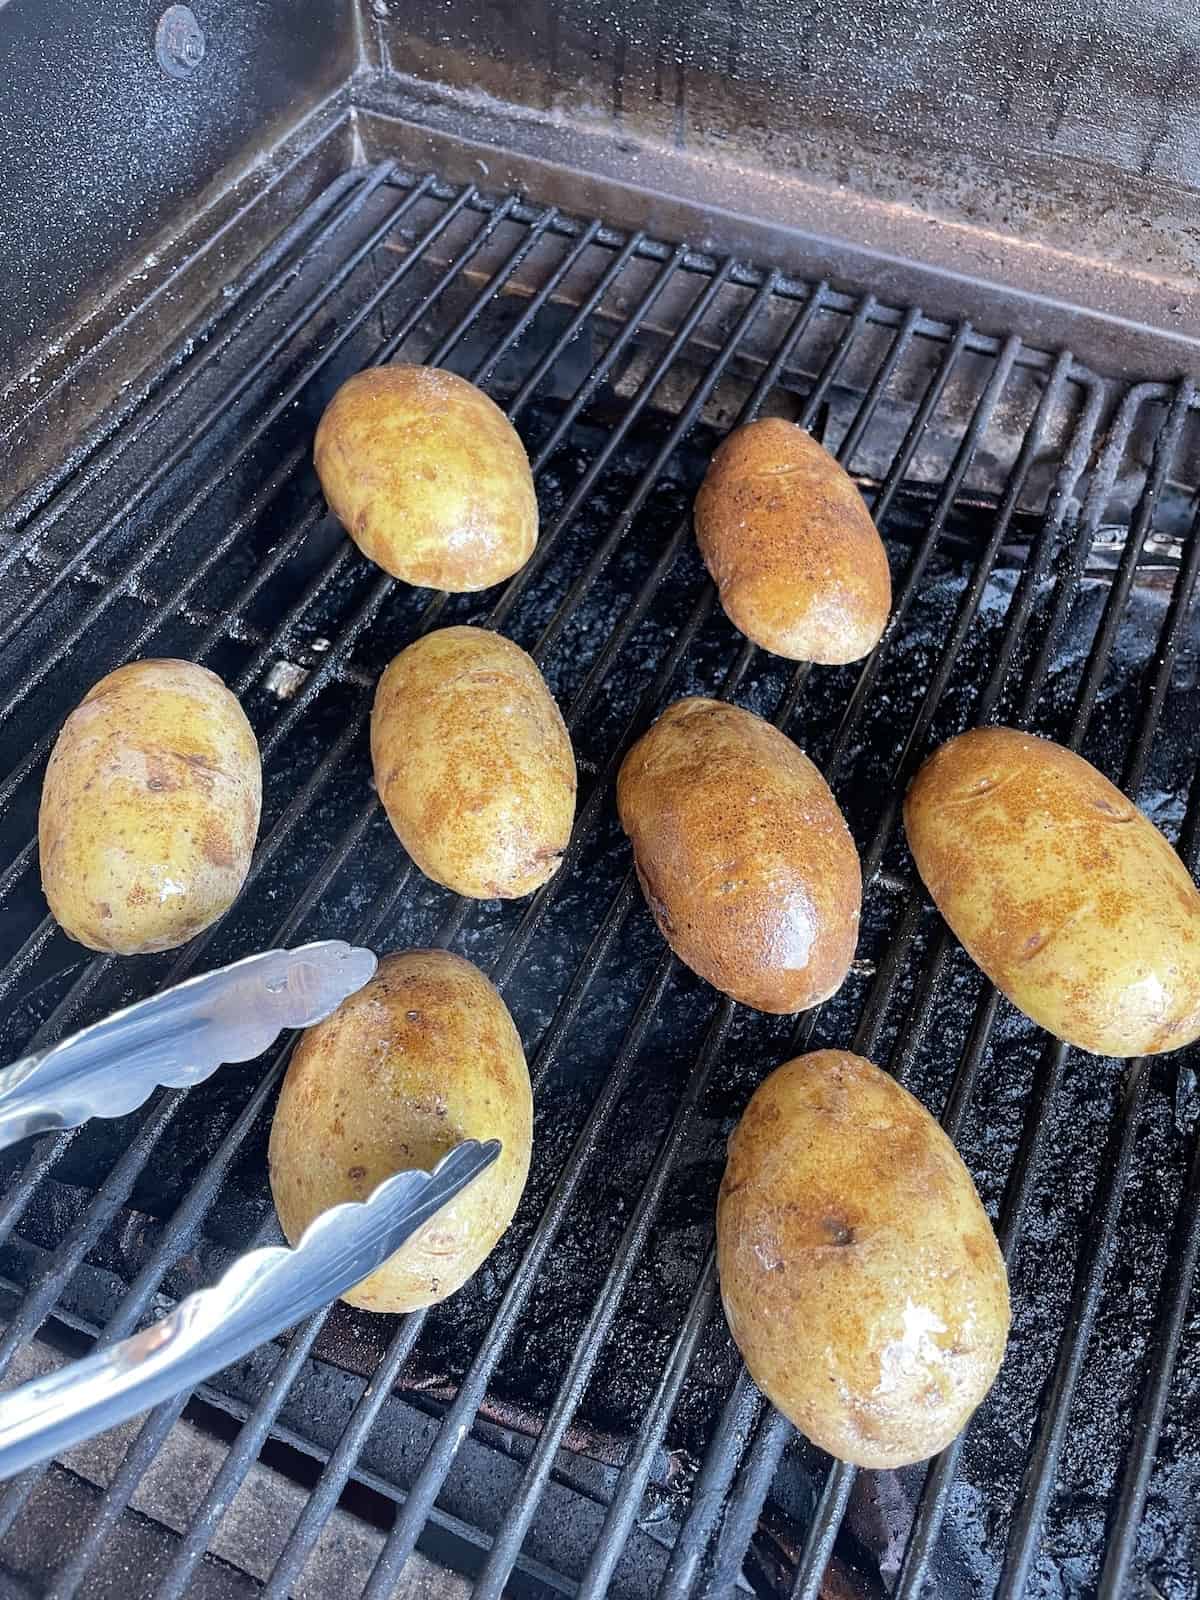 uncooked potato skins on grill